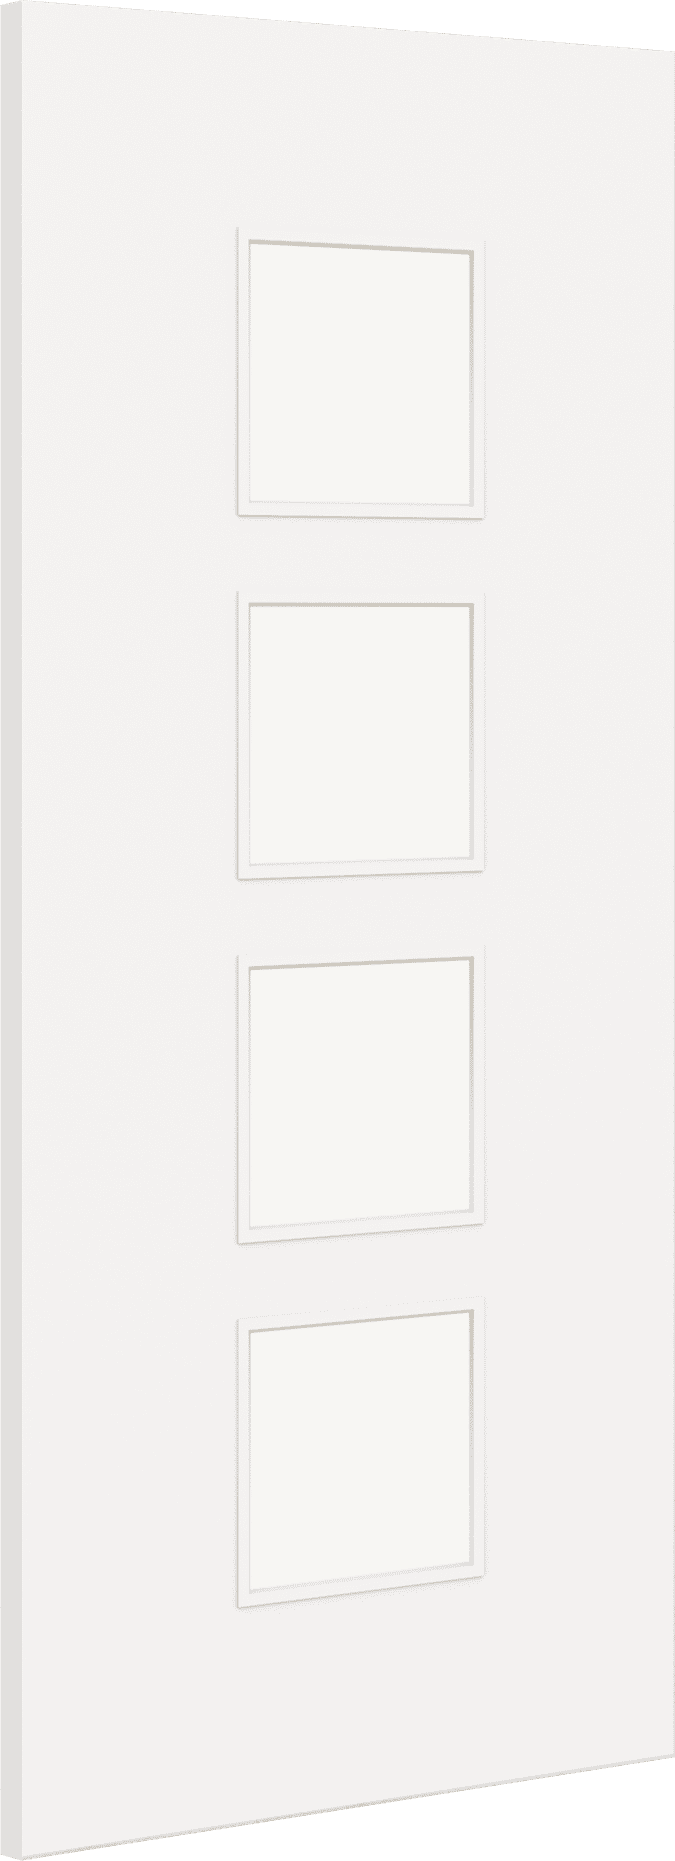 1981mm x 914mm x 44mm (36") Architectural Paint Grade White 09 Frosted Glazed Fire Door Blank